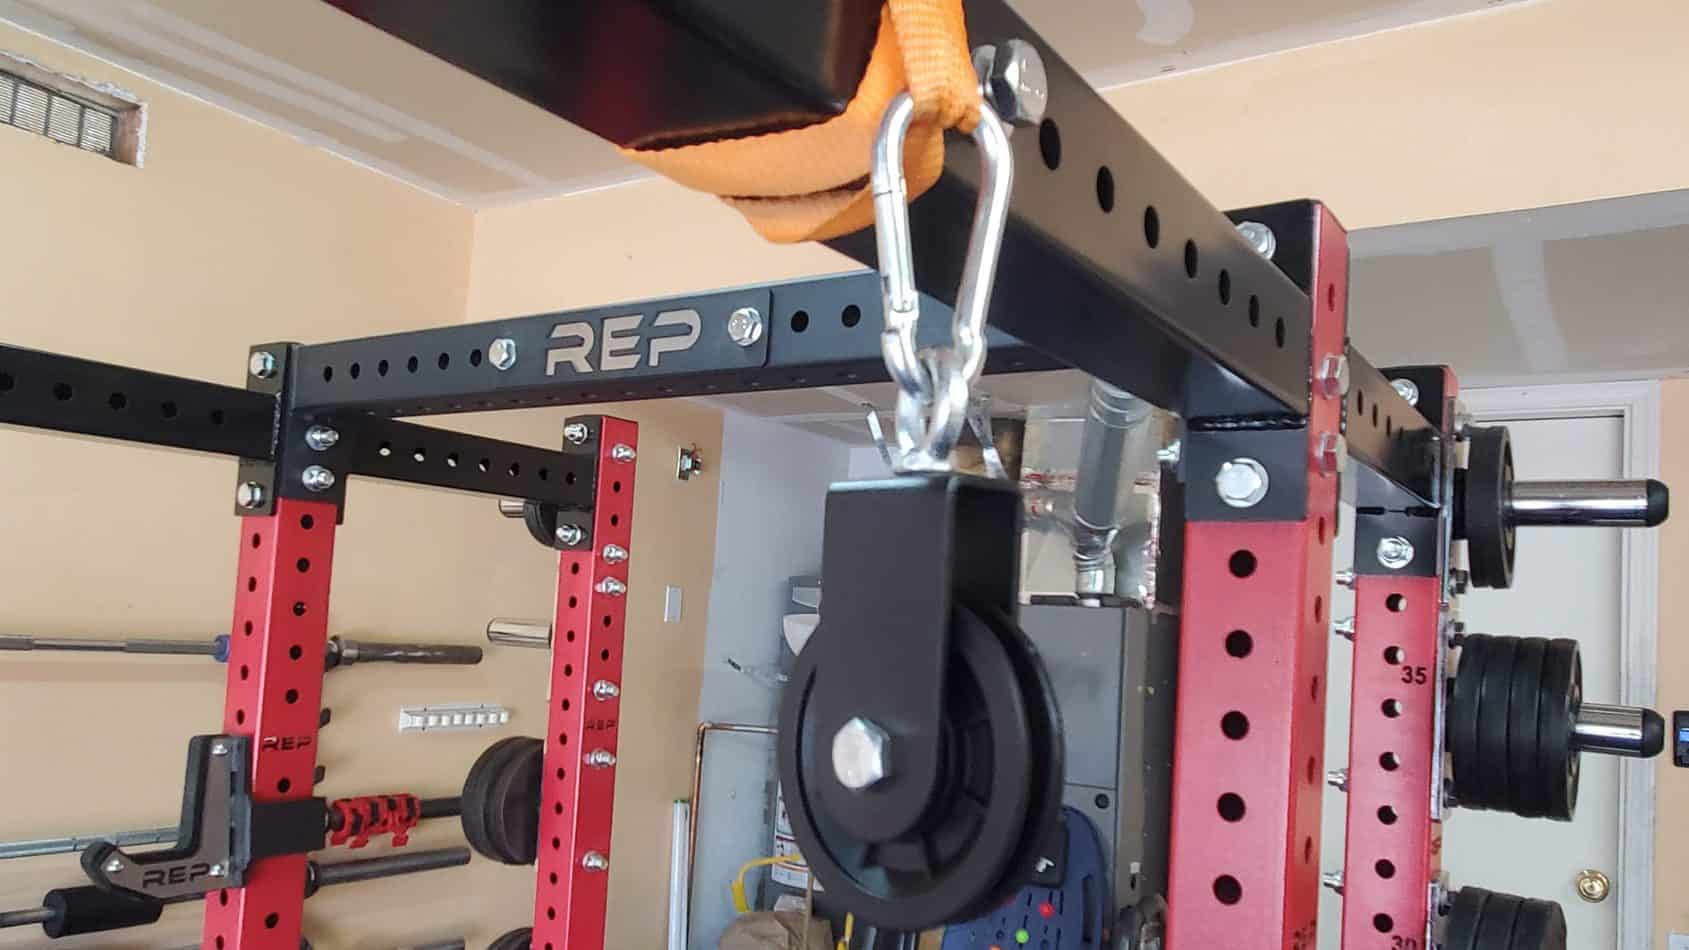 How To Make Your Own DIY Home Gym Pulley System